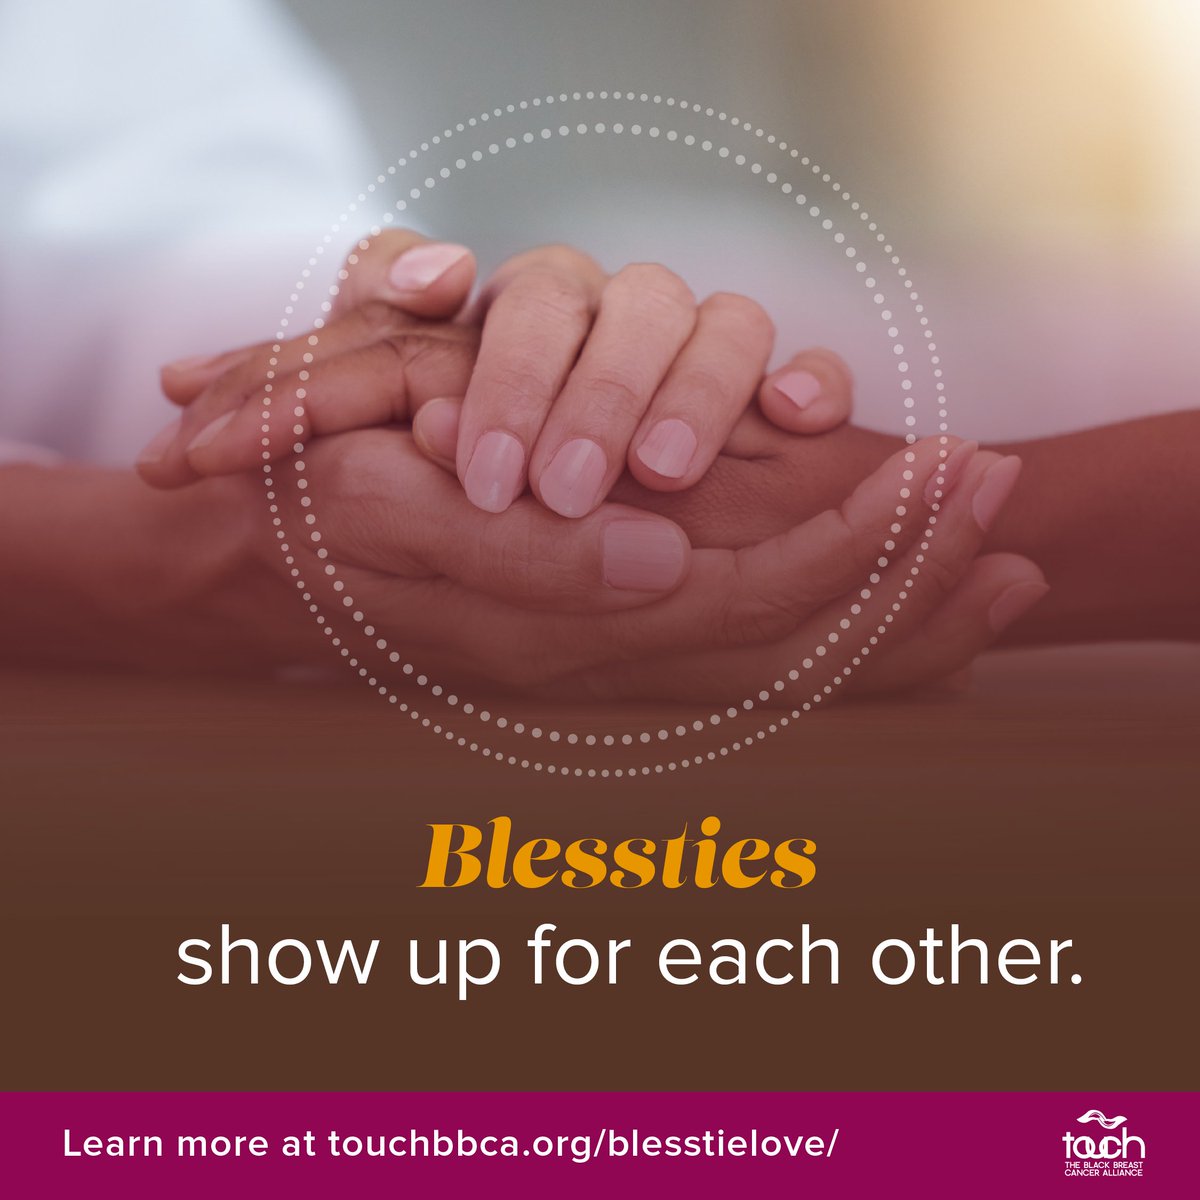 How do we show up for each other when times are hard or when everything feels overwhelming? Remember that one small thing makes a big difference. Offering practical help can be as simple as sending a meal, offering to shop, or doing a load of laundry.